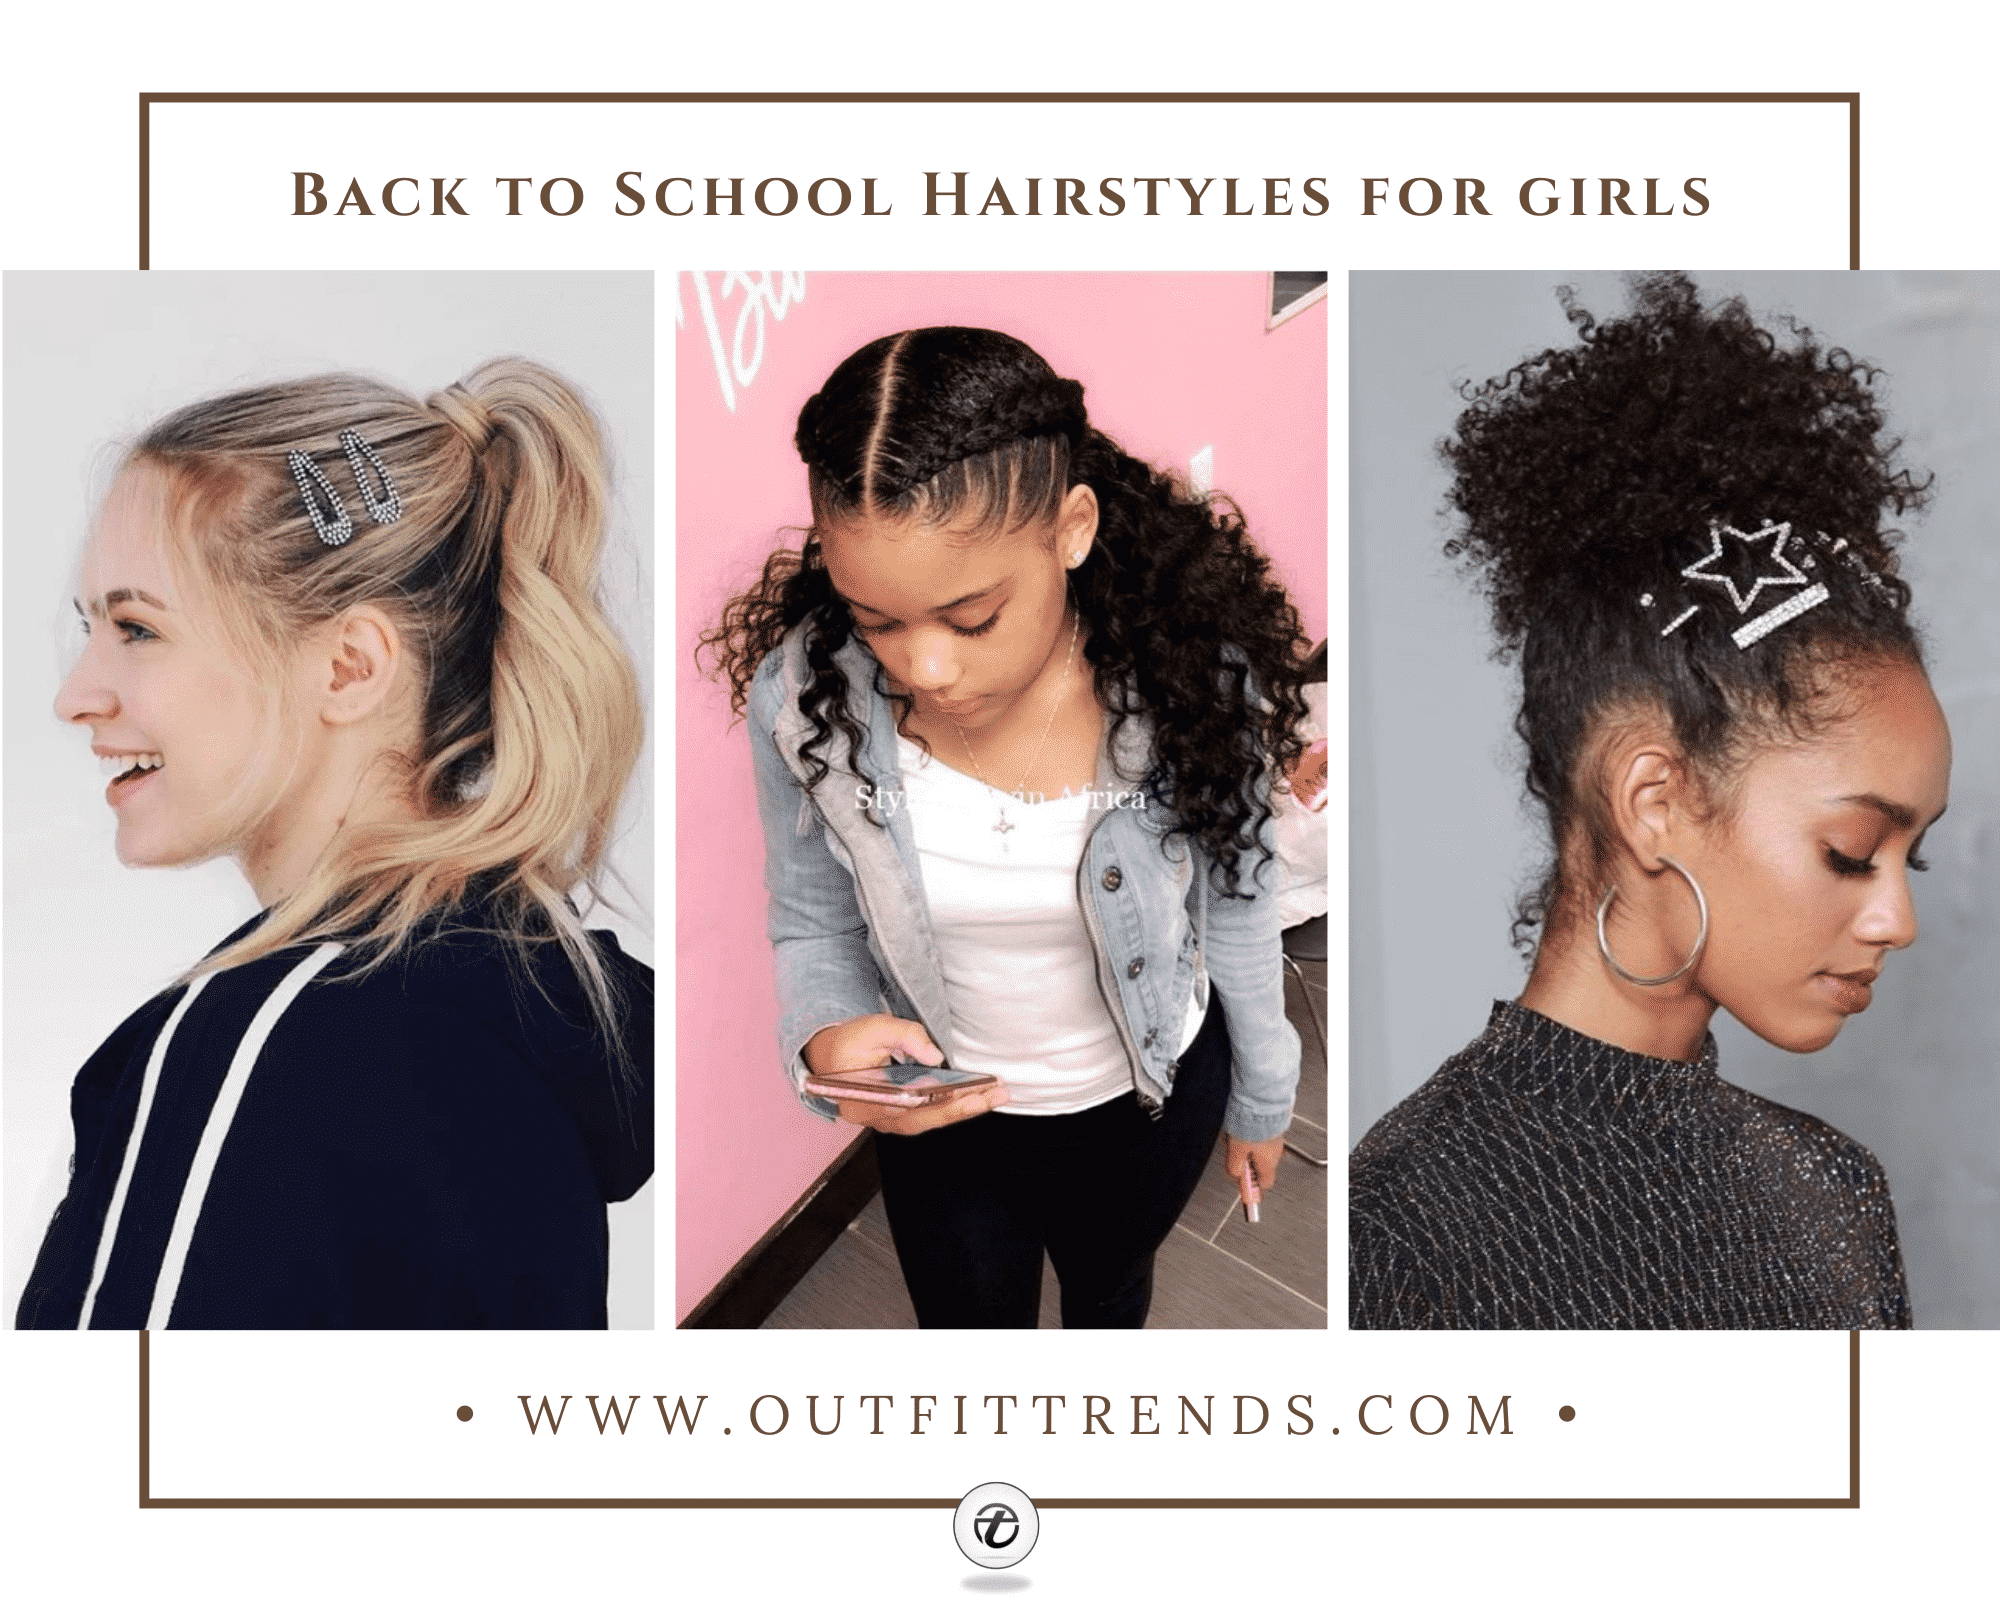 7 Girls Hairstyle Tutorials for School - The Organised Housewife